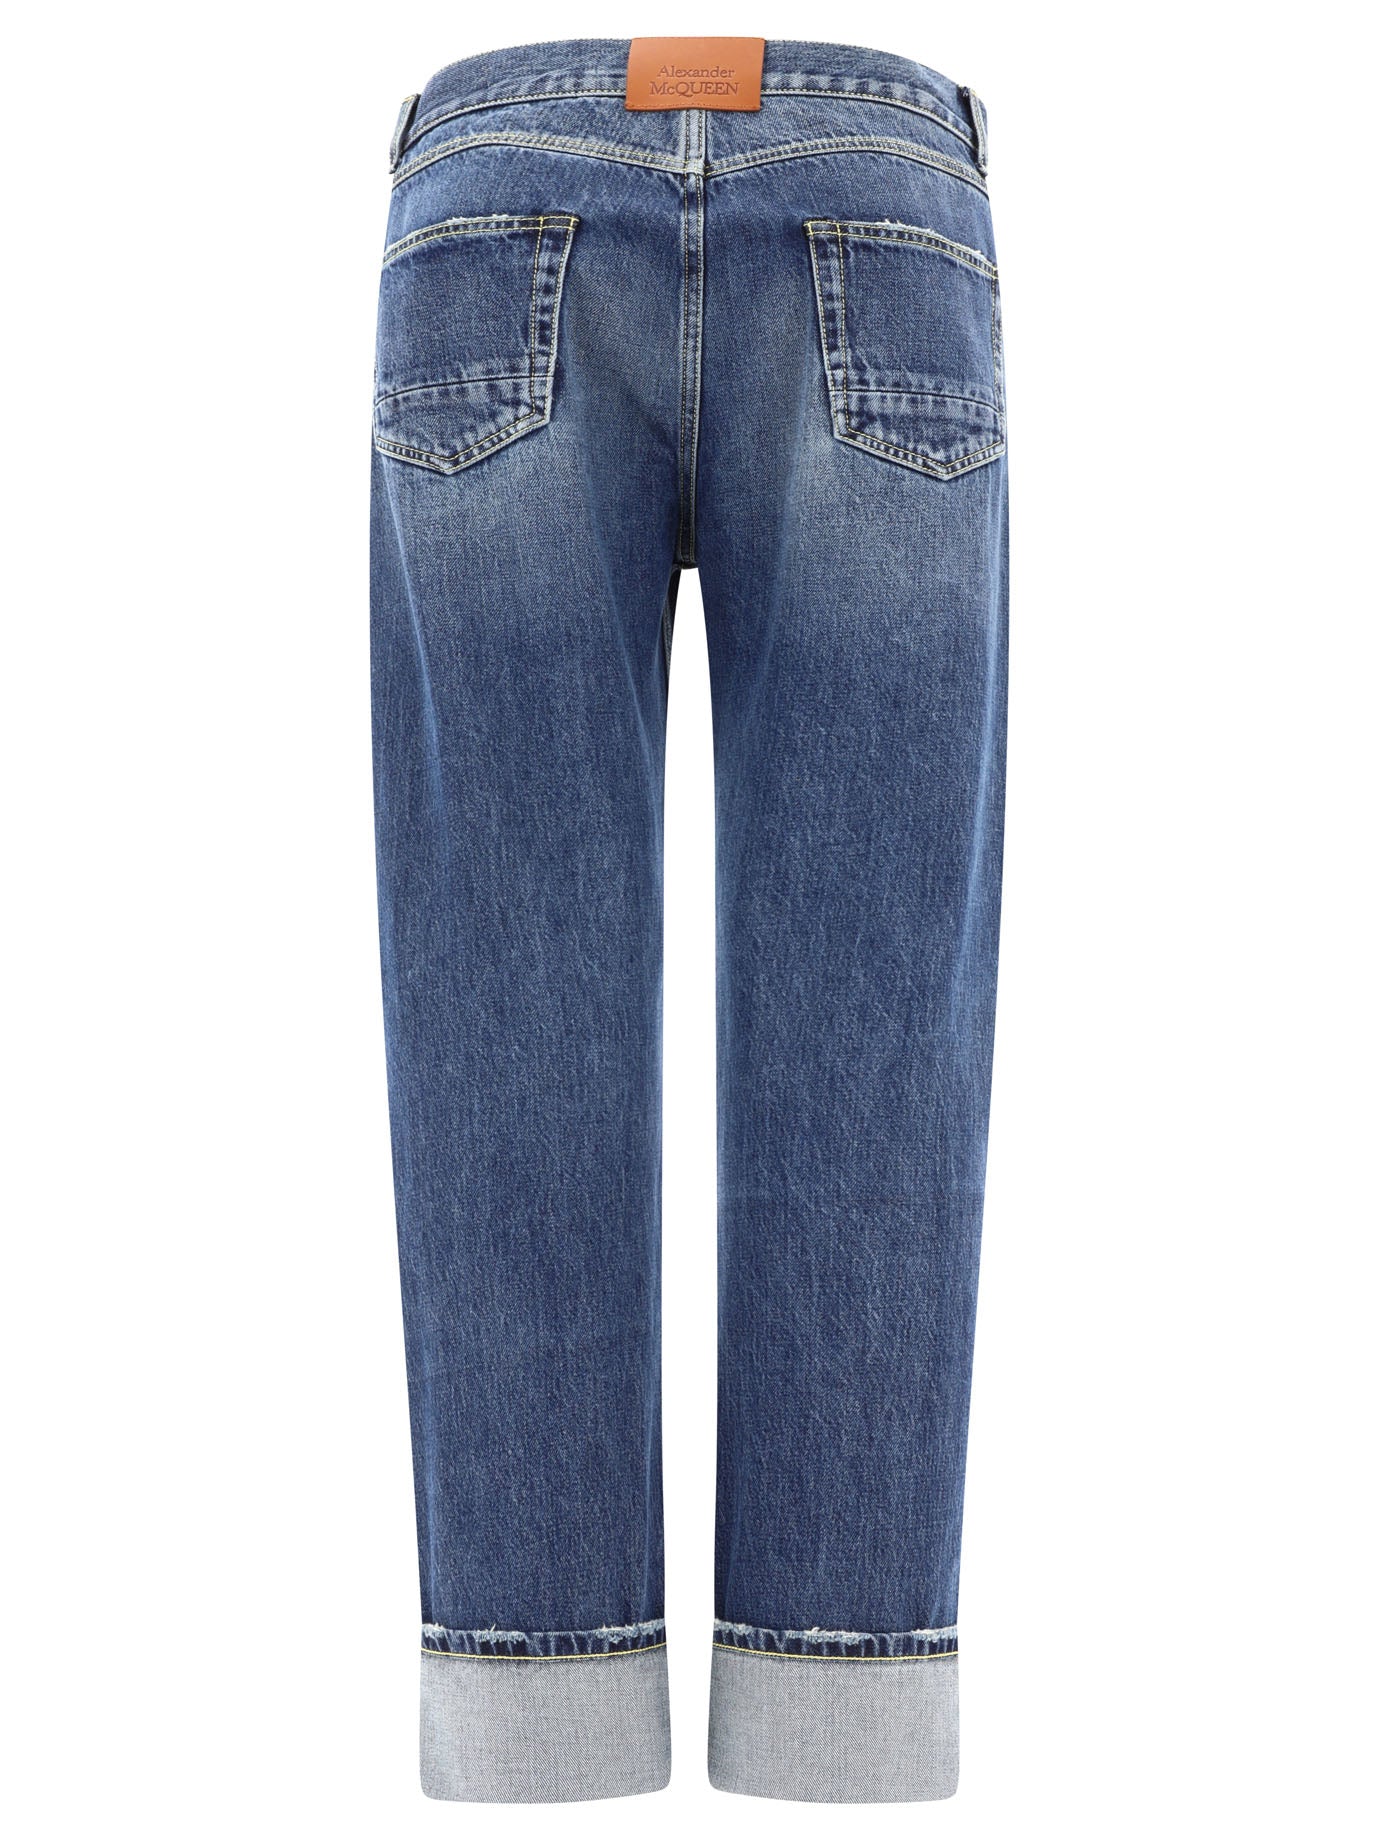 Shop Alexander Mcqueen Classic Turn-up Jeans In Blue For Men